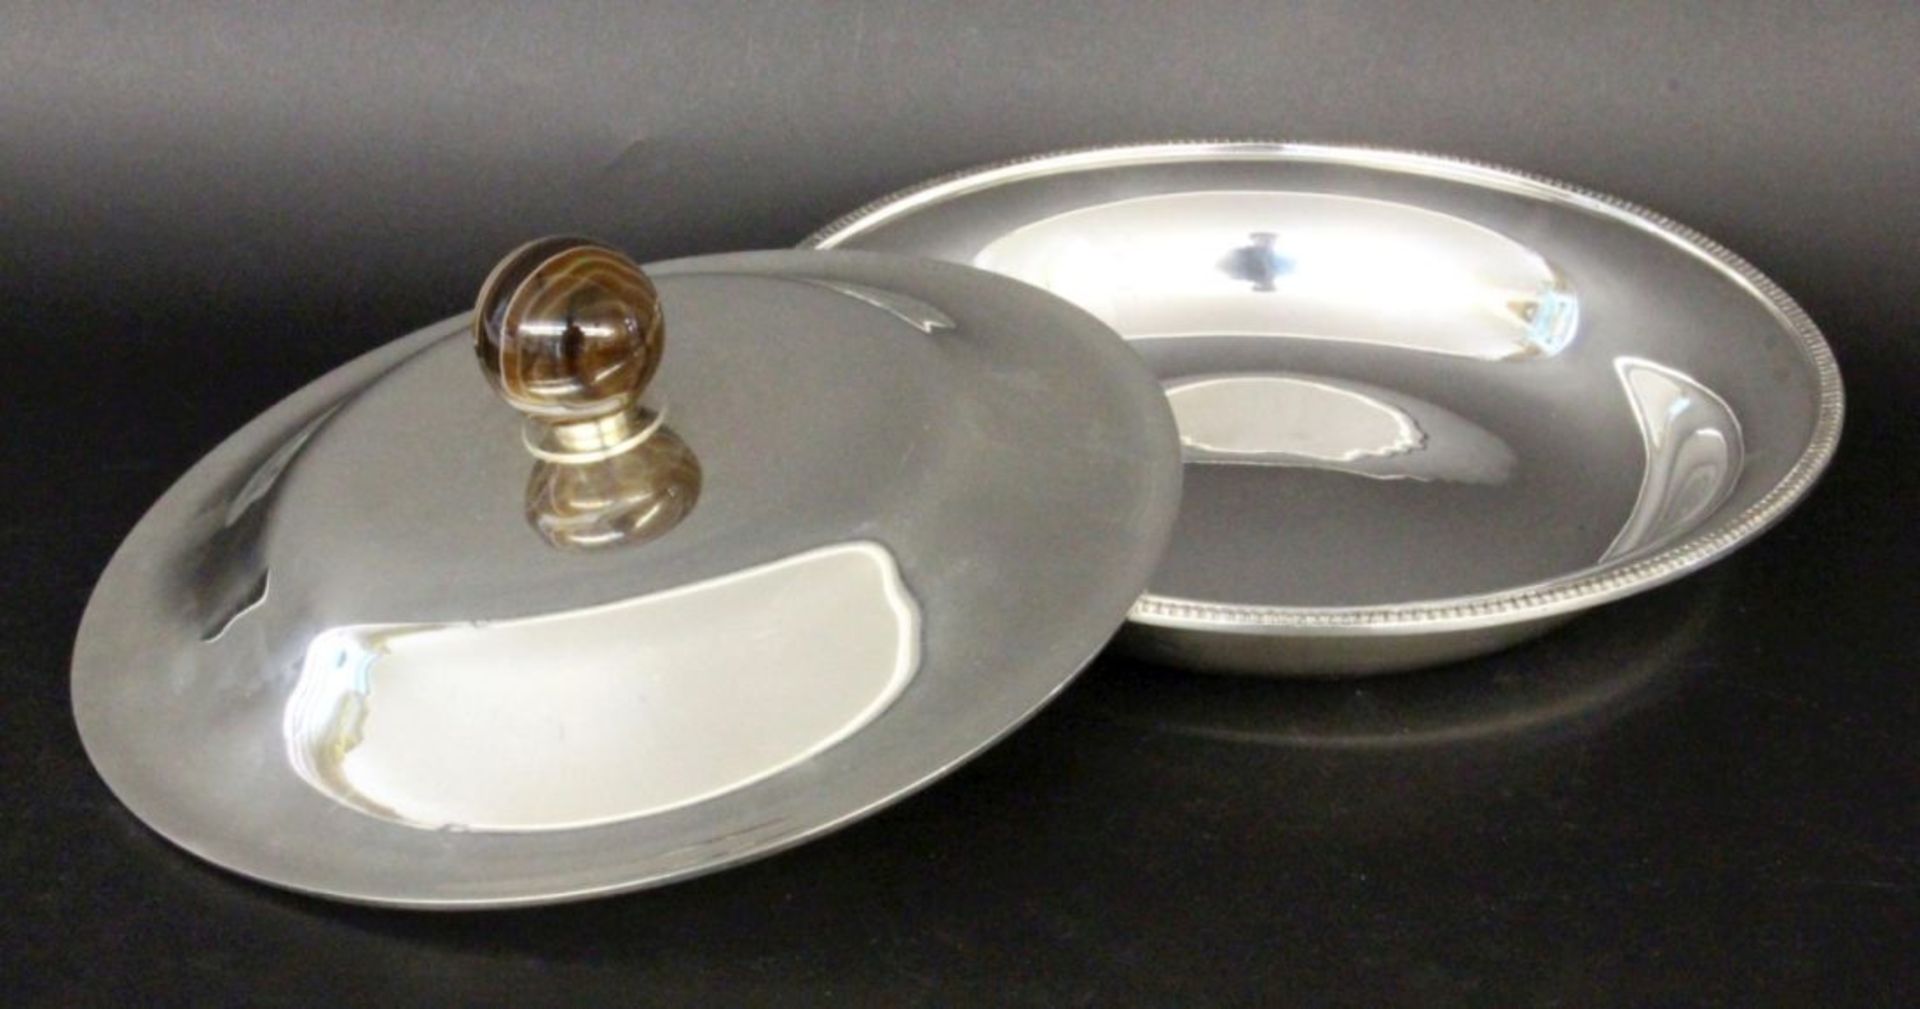 AN ART DECO TUREEN WITH COVER Silver. Arched round shape with beaded rim. Agate ball knob.